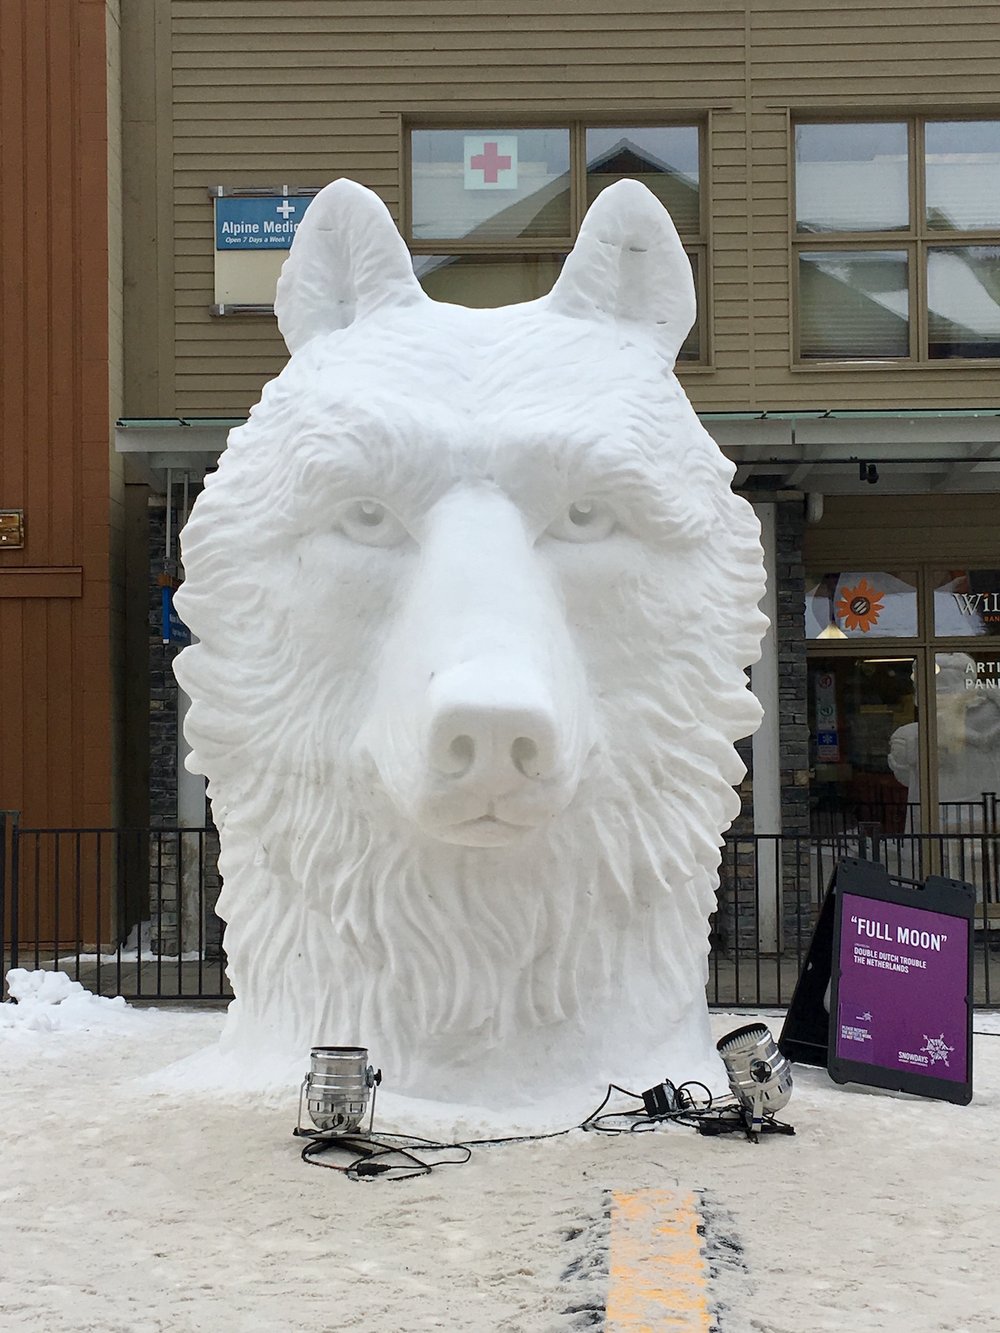  One of the many SnowDays sculptures found downtown Banff. Photo Meghan J. Ward collection. 